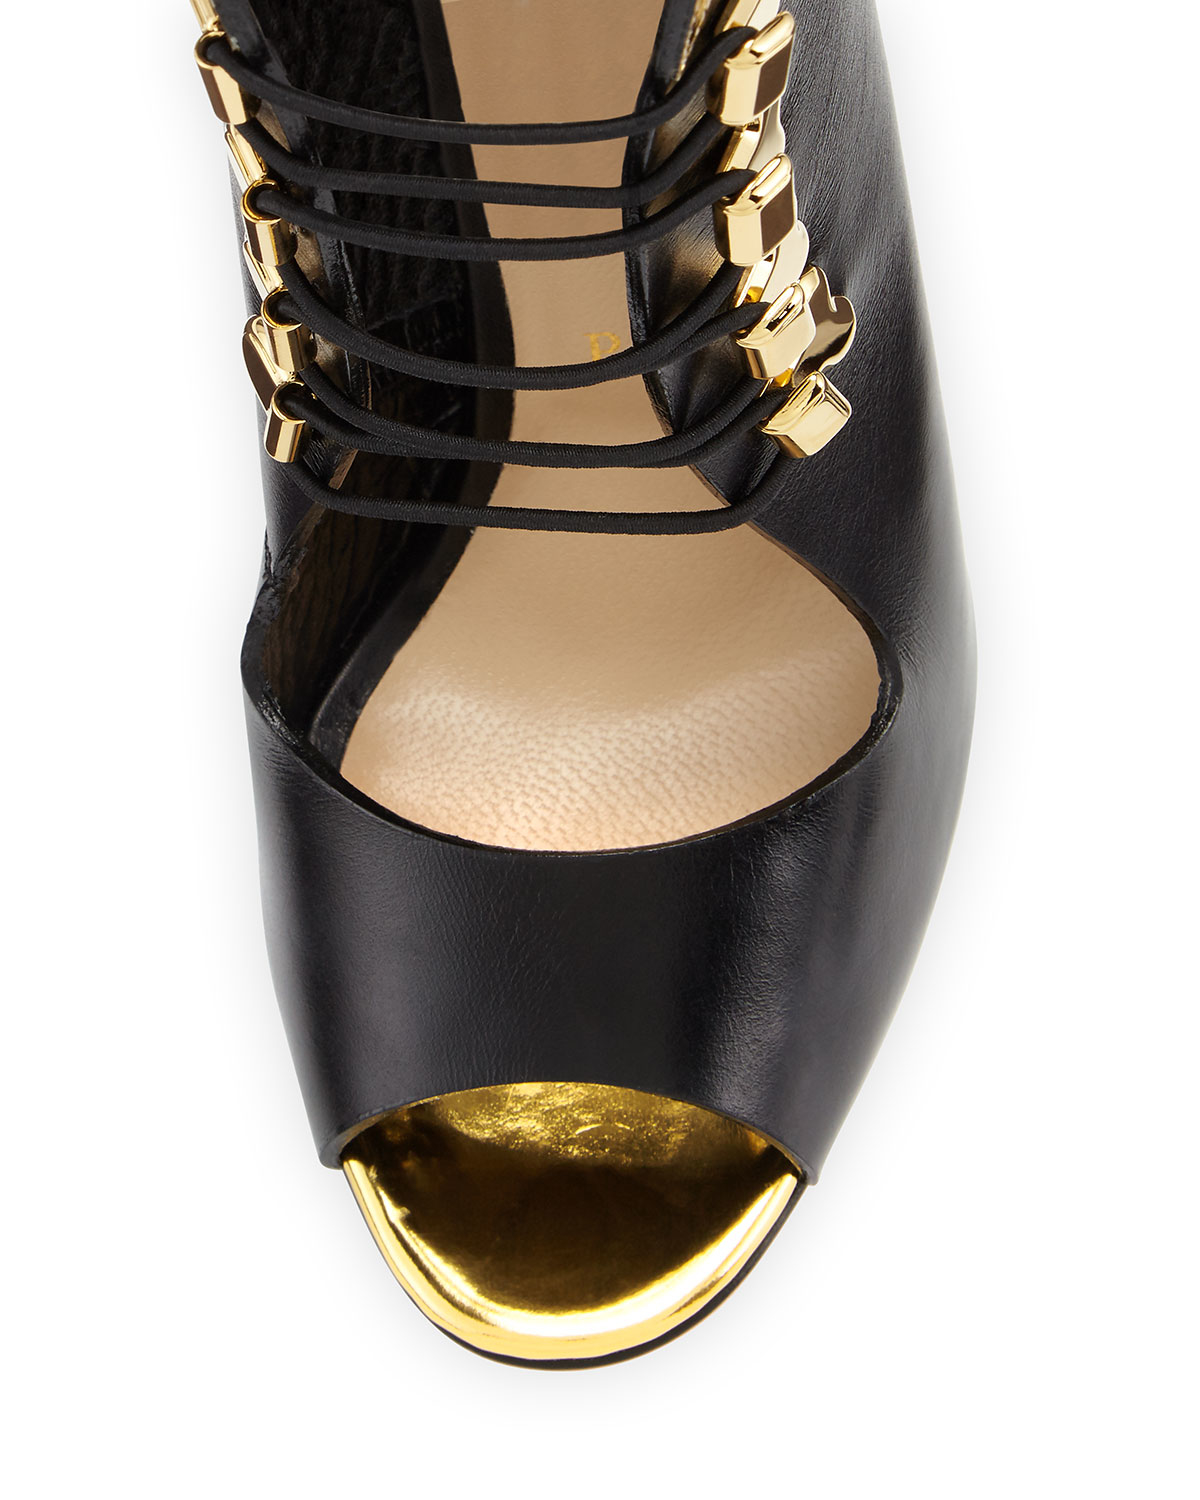 christian louboutin spiked shoes for men - Christian louboutin Troubida Lace-Front Pumps in Black (BLACK/GOLD ...